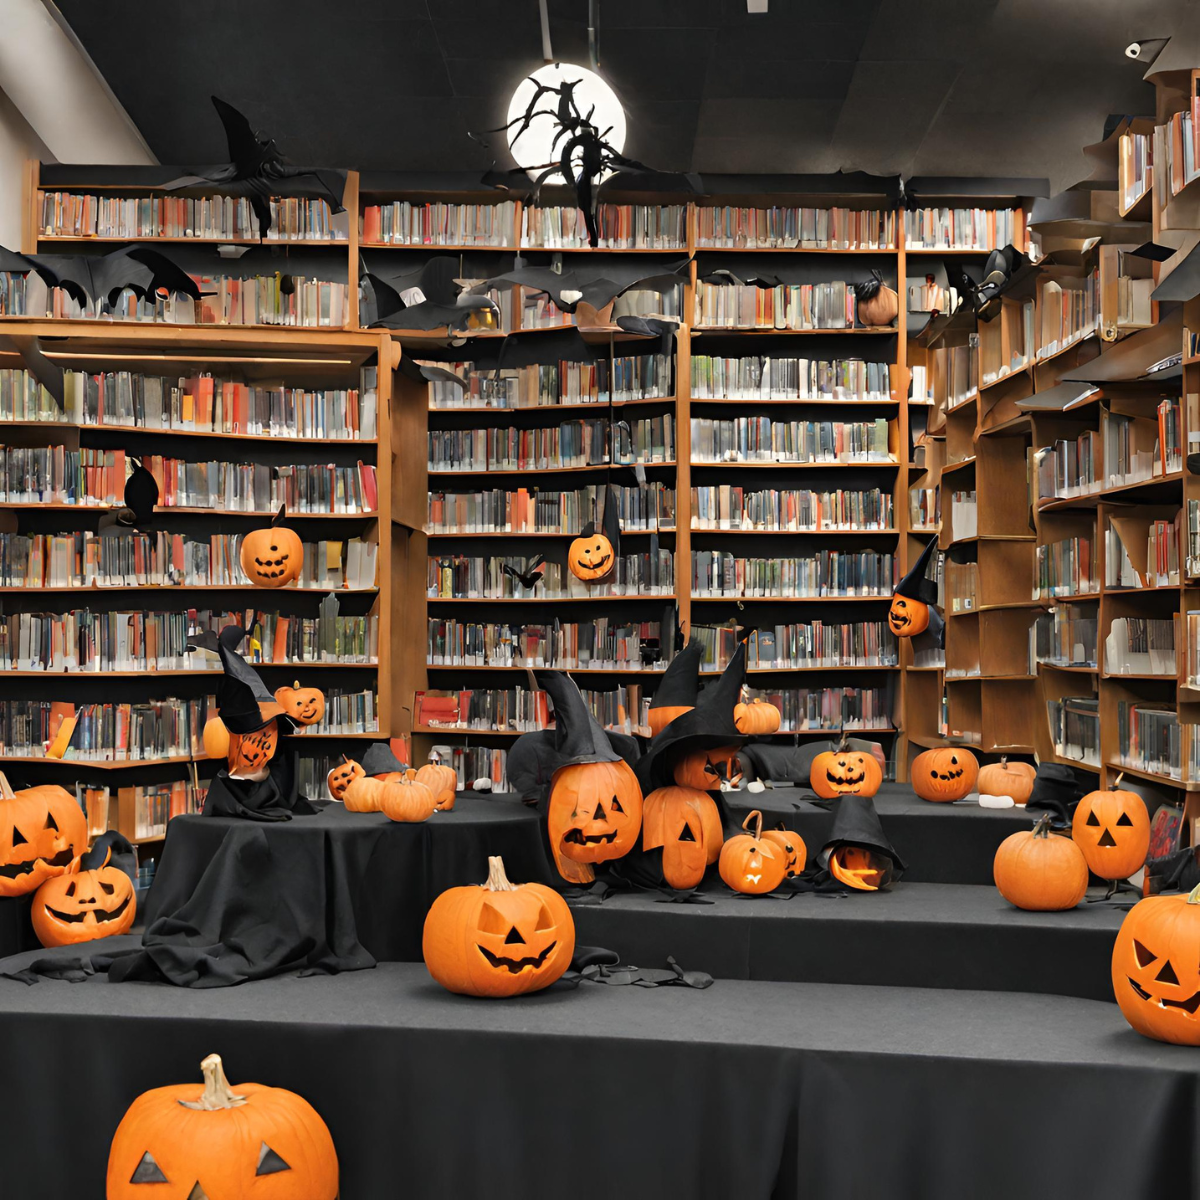 A library decorated with pumpkins